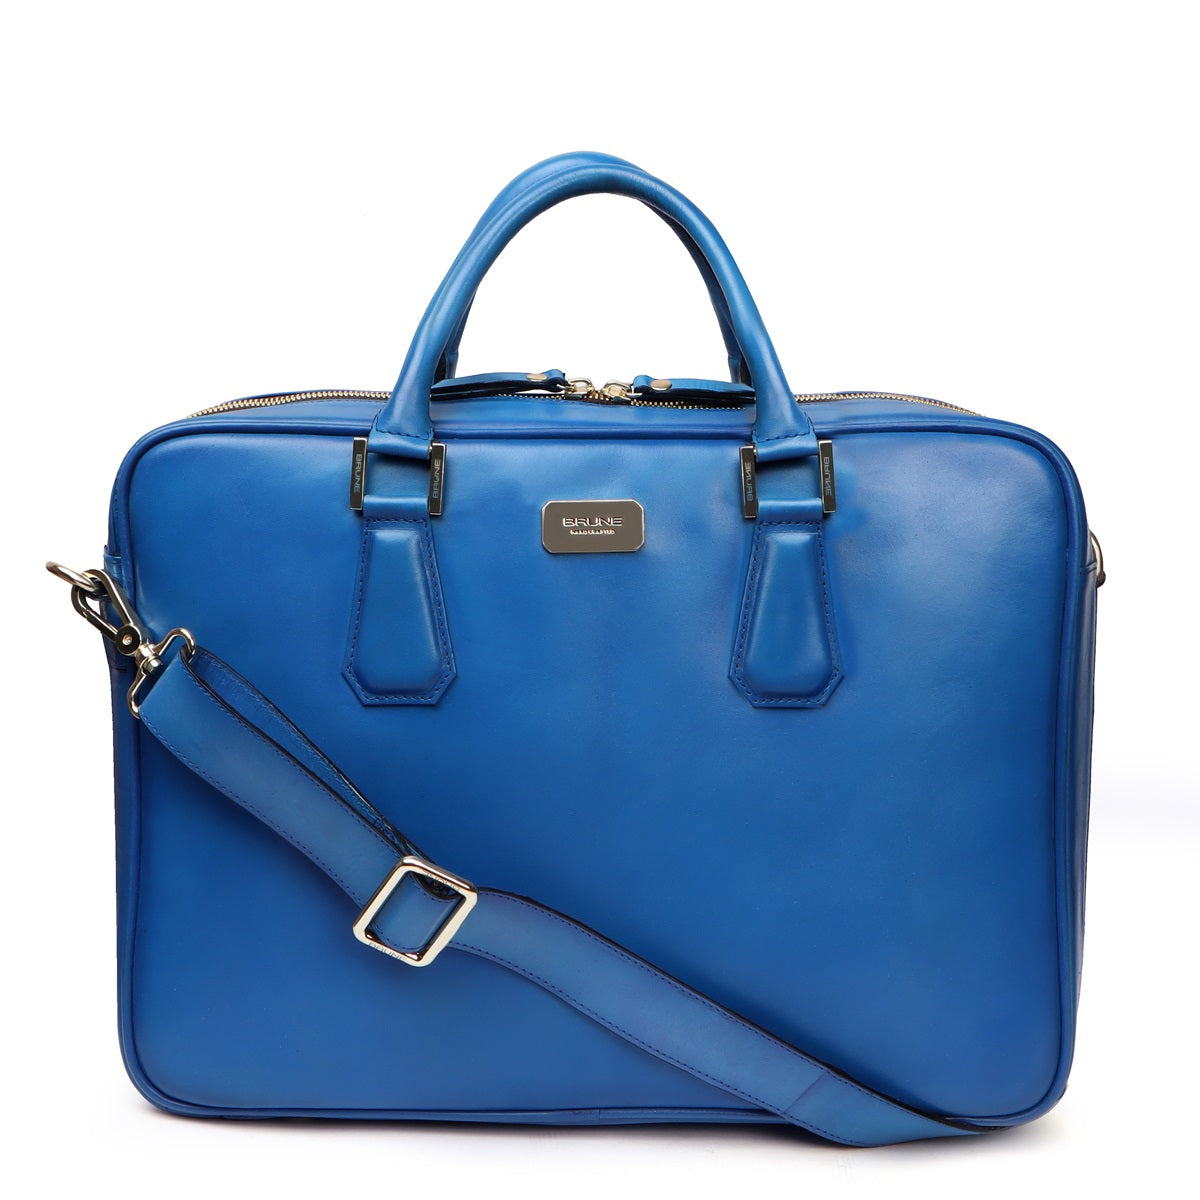 Sky Blue Office Briefcase with Organizer Compartment Leather bag by Brune & Bareskin